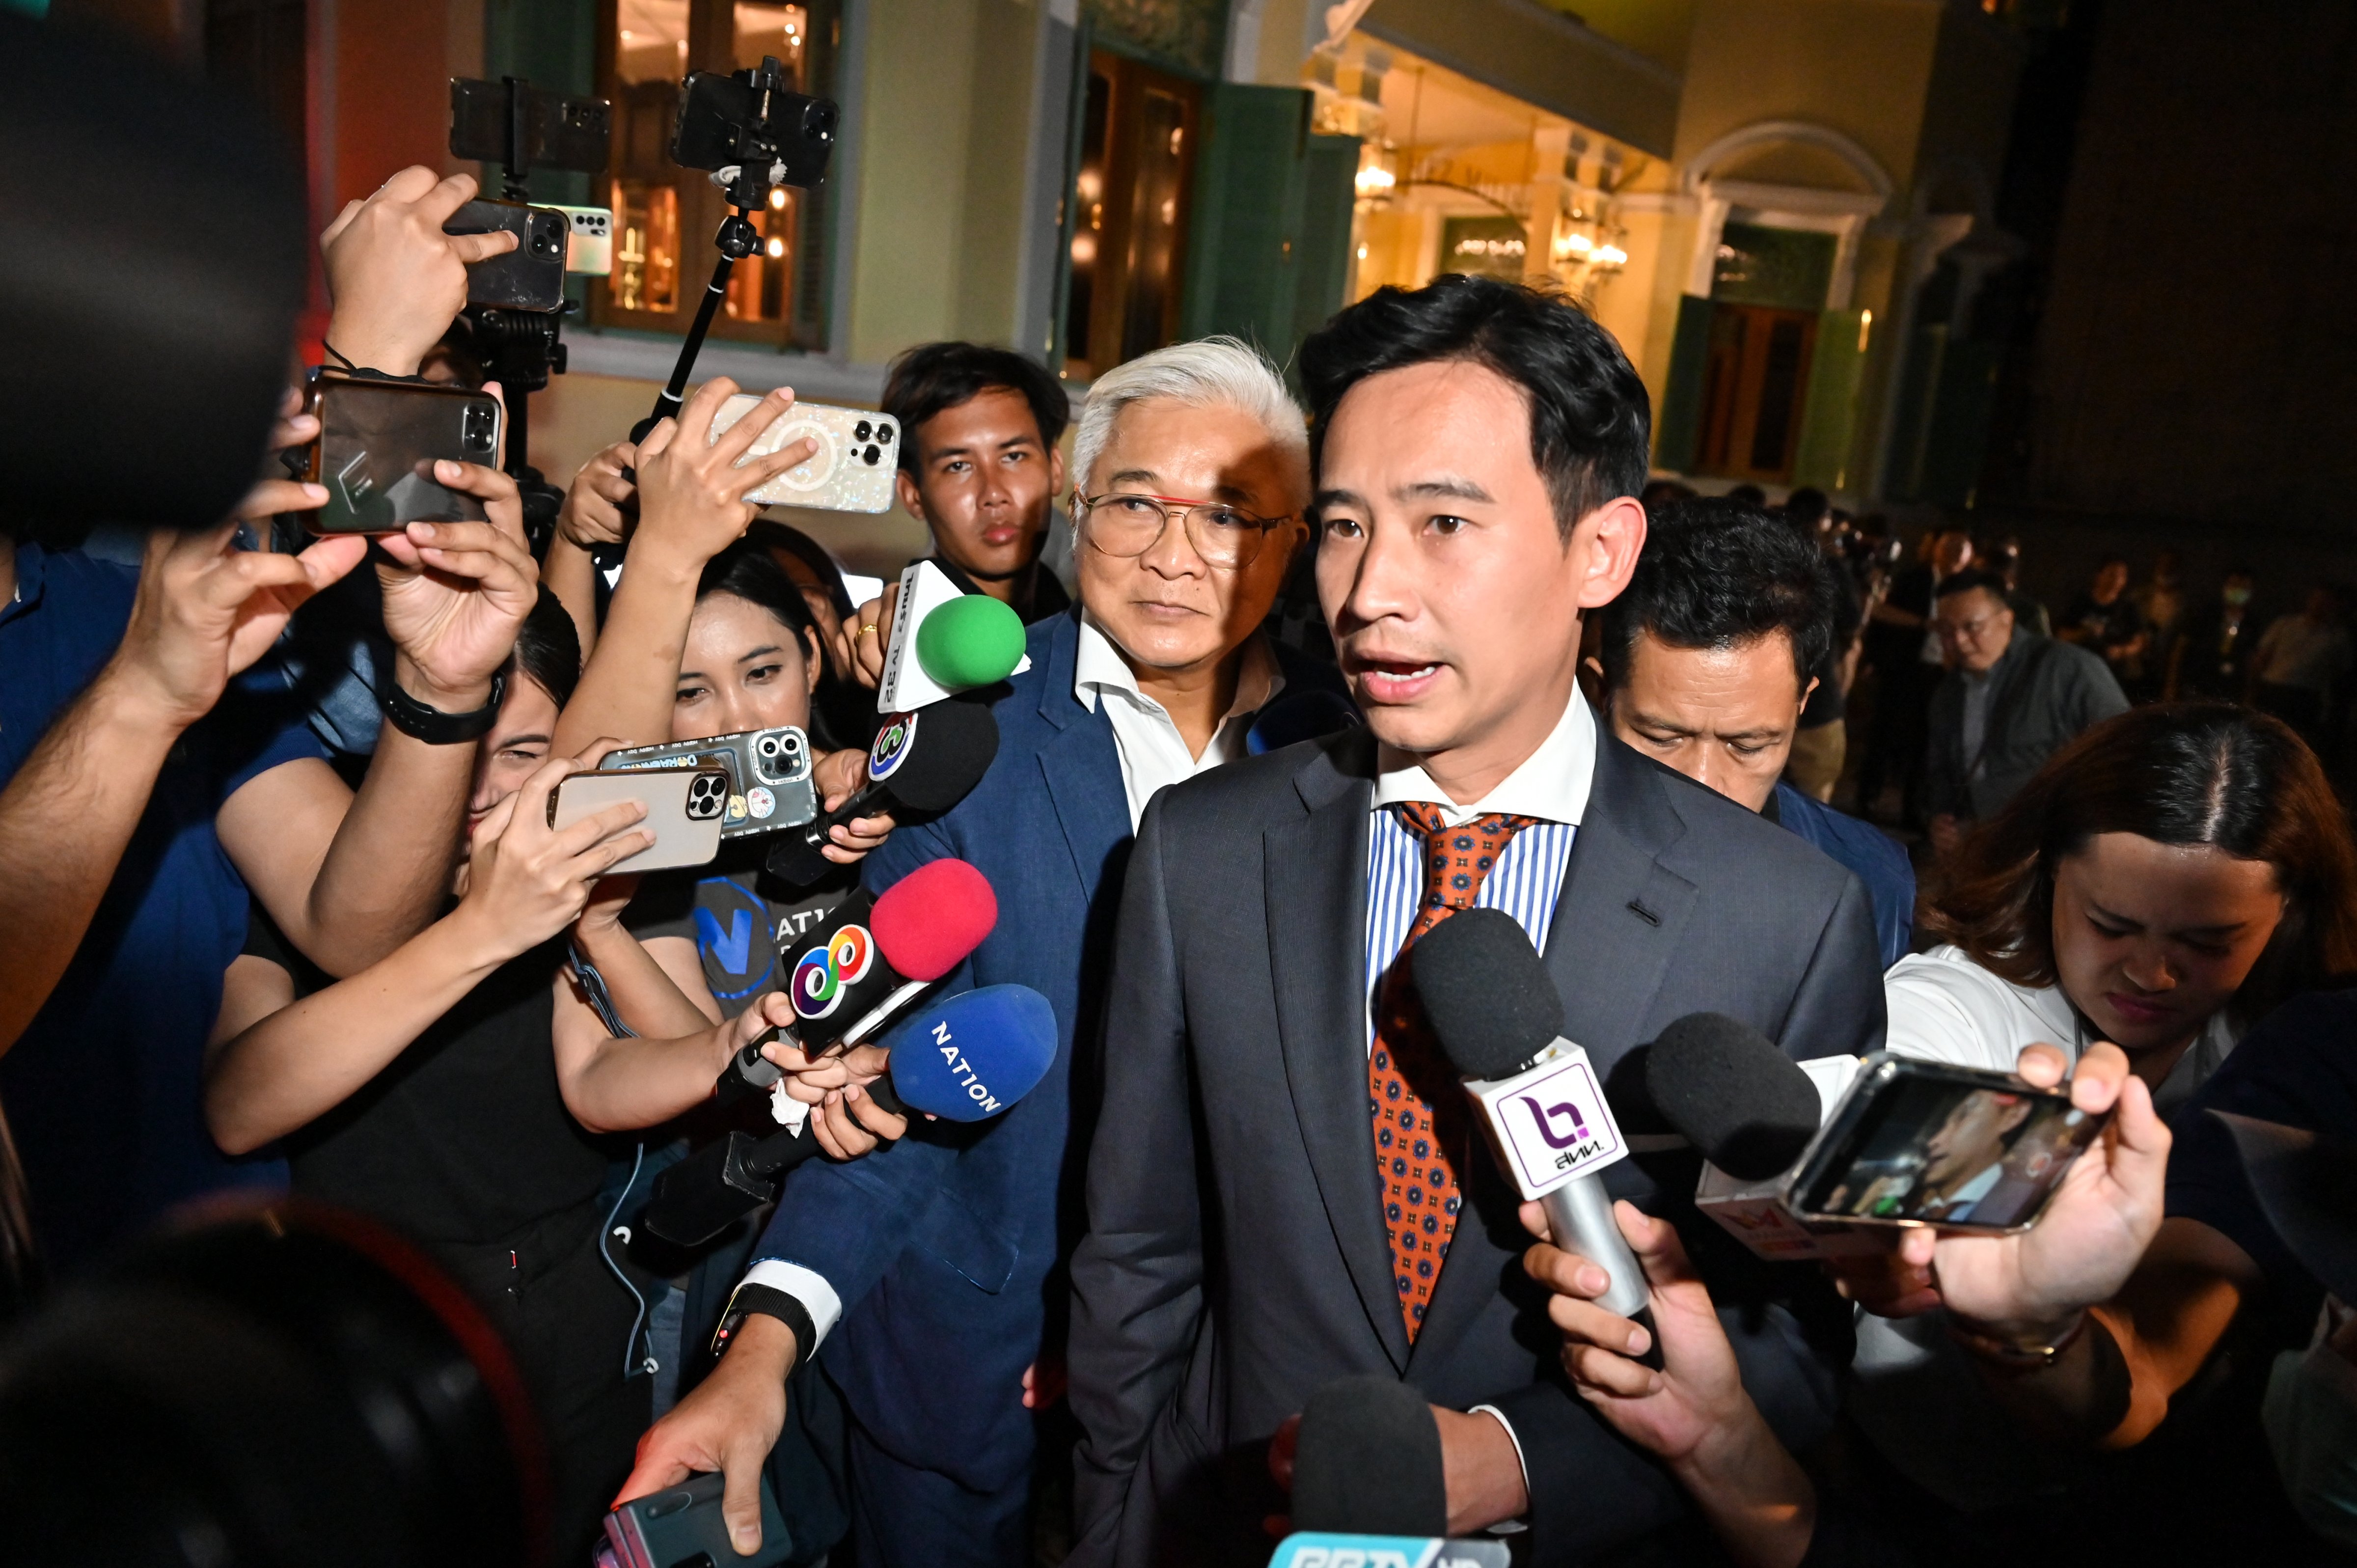 Pita Limjaroenrat, leader of the Move Forward Party, speaks to members of the media following a meeting with coalition partners in Bangkok, Thailand, on Wednesday, May 17, 2023. (James Wilson—Bloomberg/Getty Images)